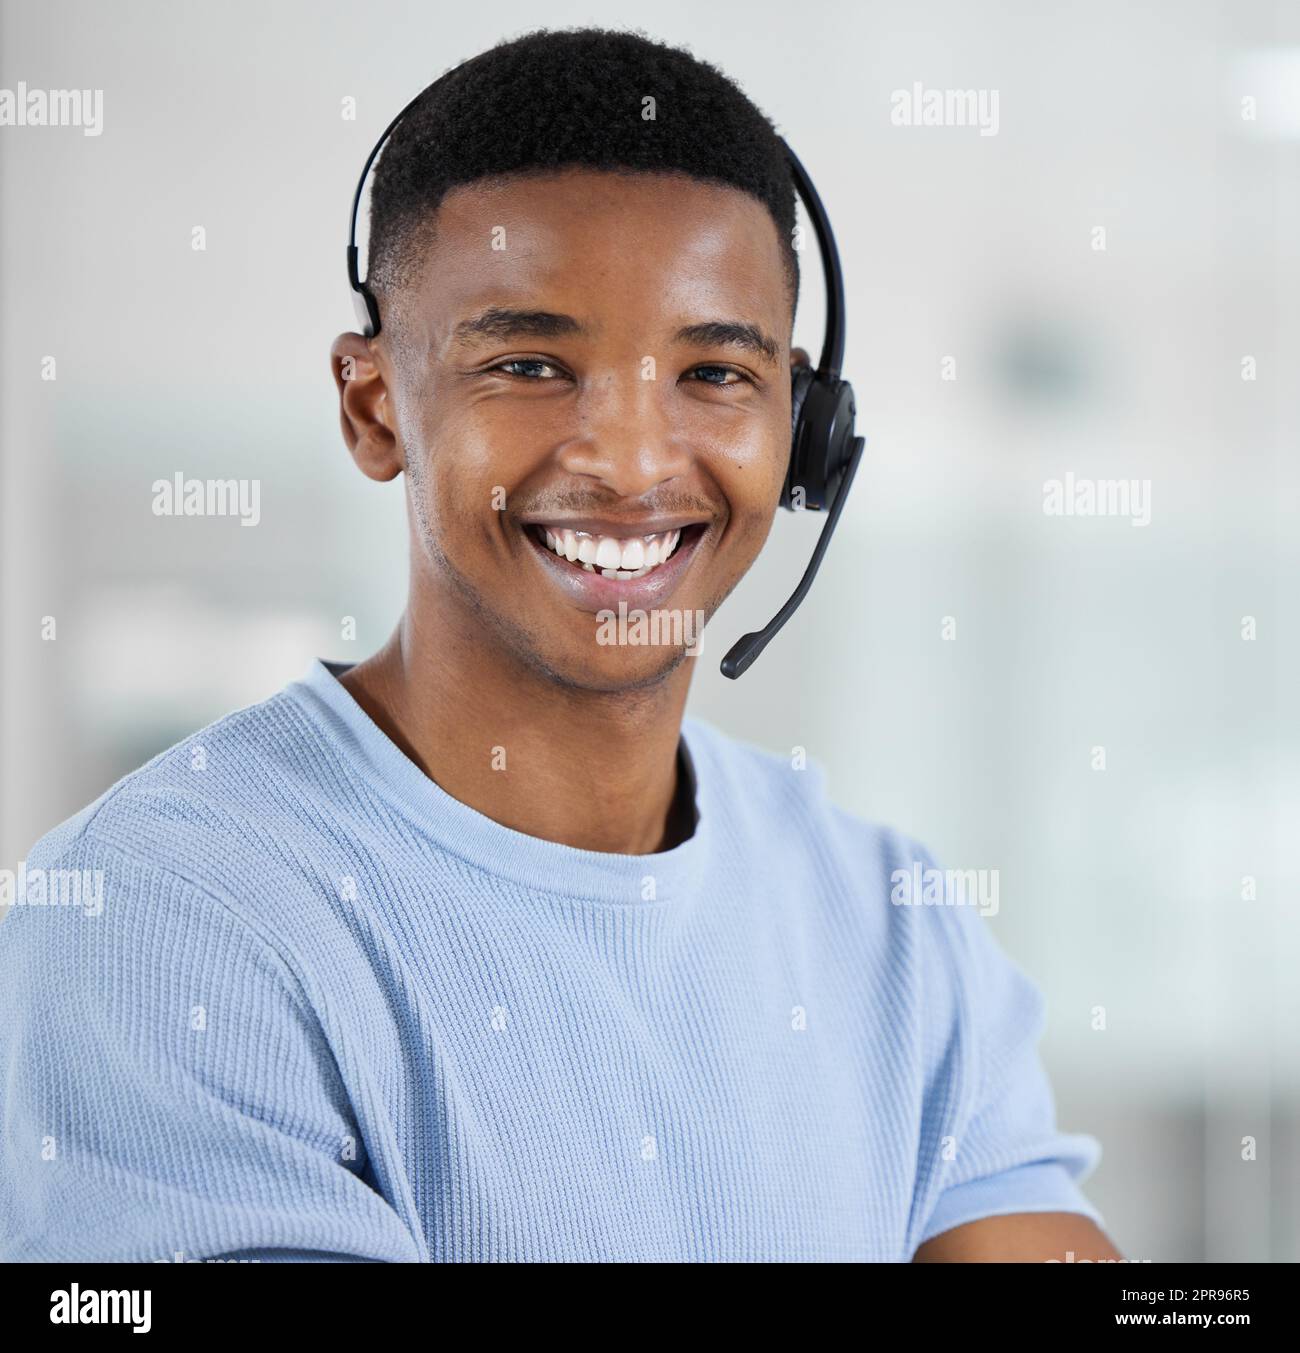 Building customer loyalty starts with exceptional customer service. Portrait of a young businessman working in a call centre. Stock Photo